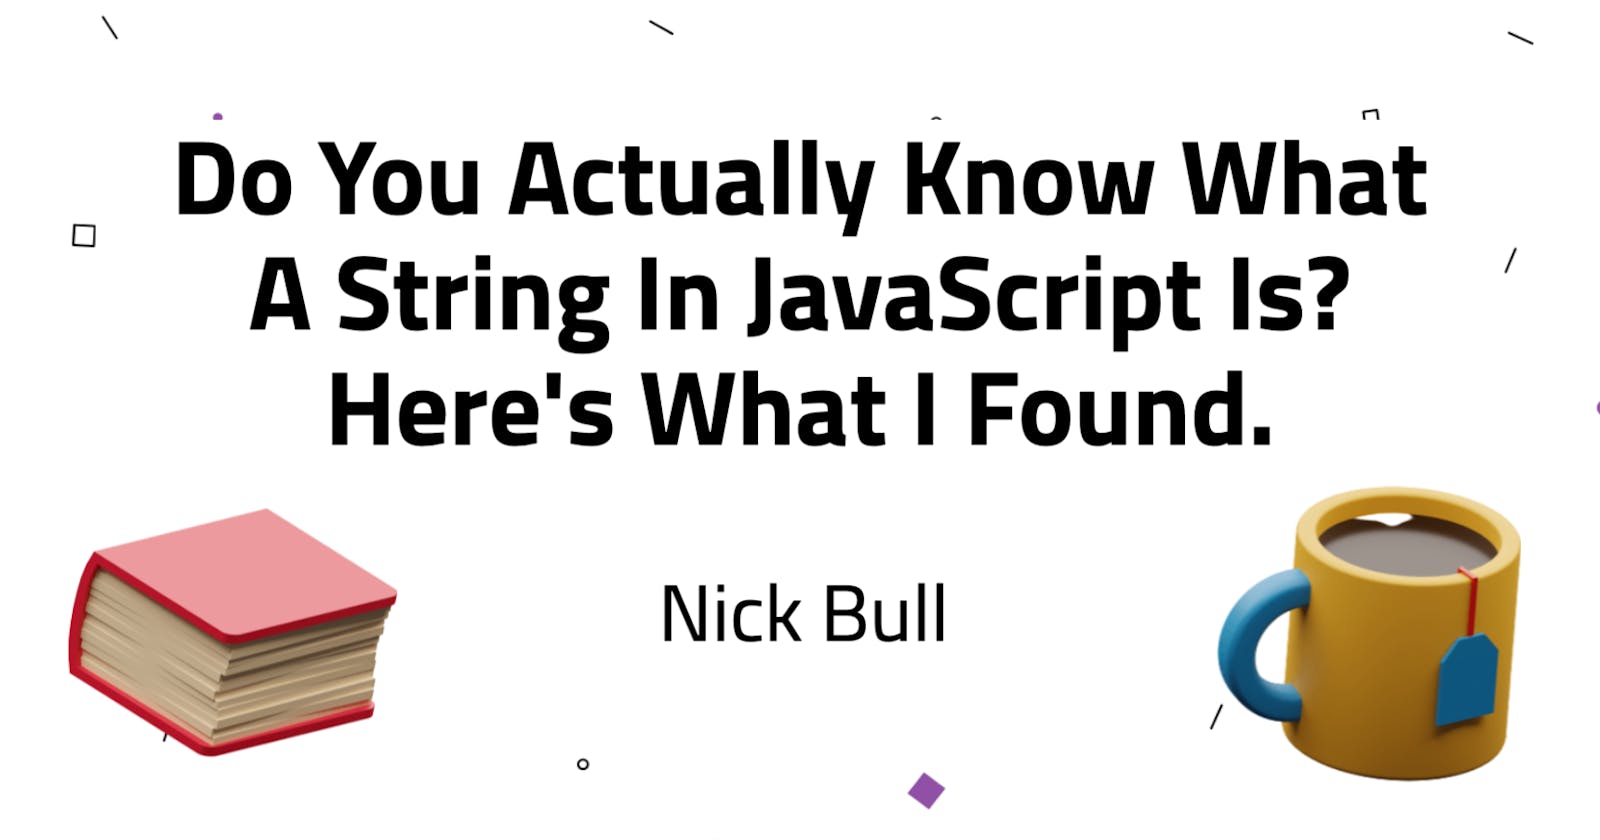 Do You Actually Know What A String In JavaScript Is? Here's What I Found.